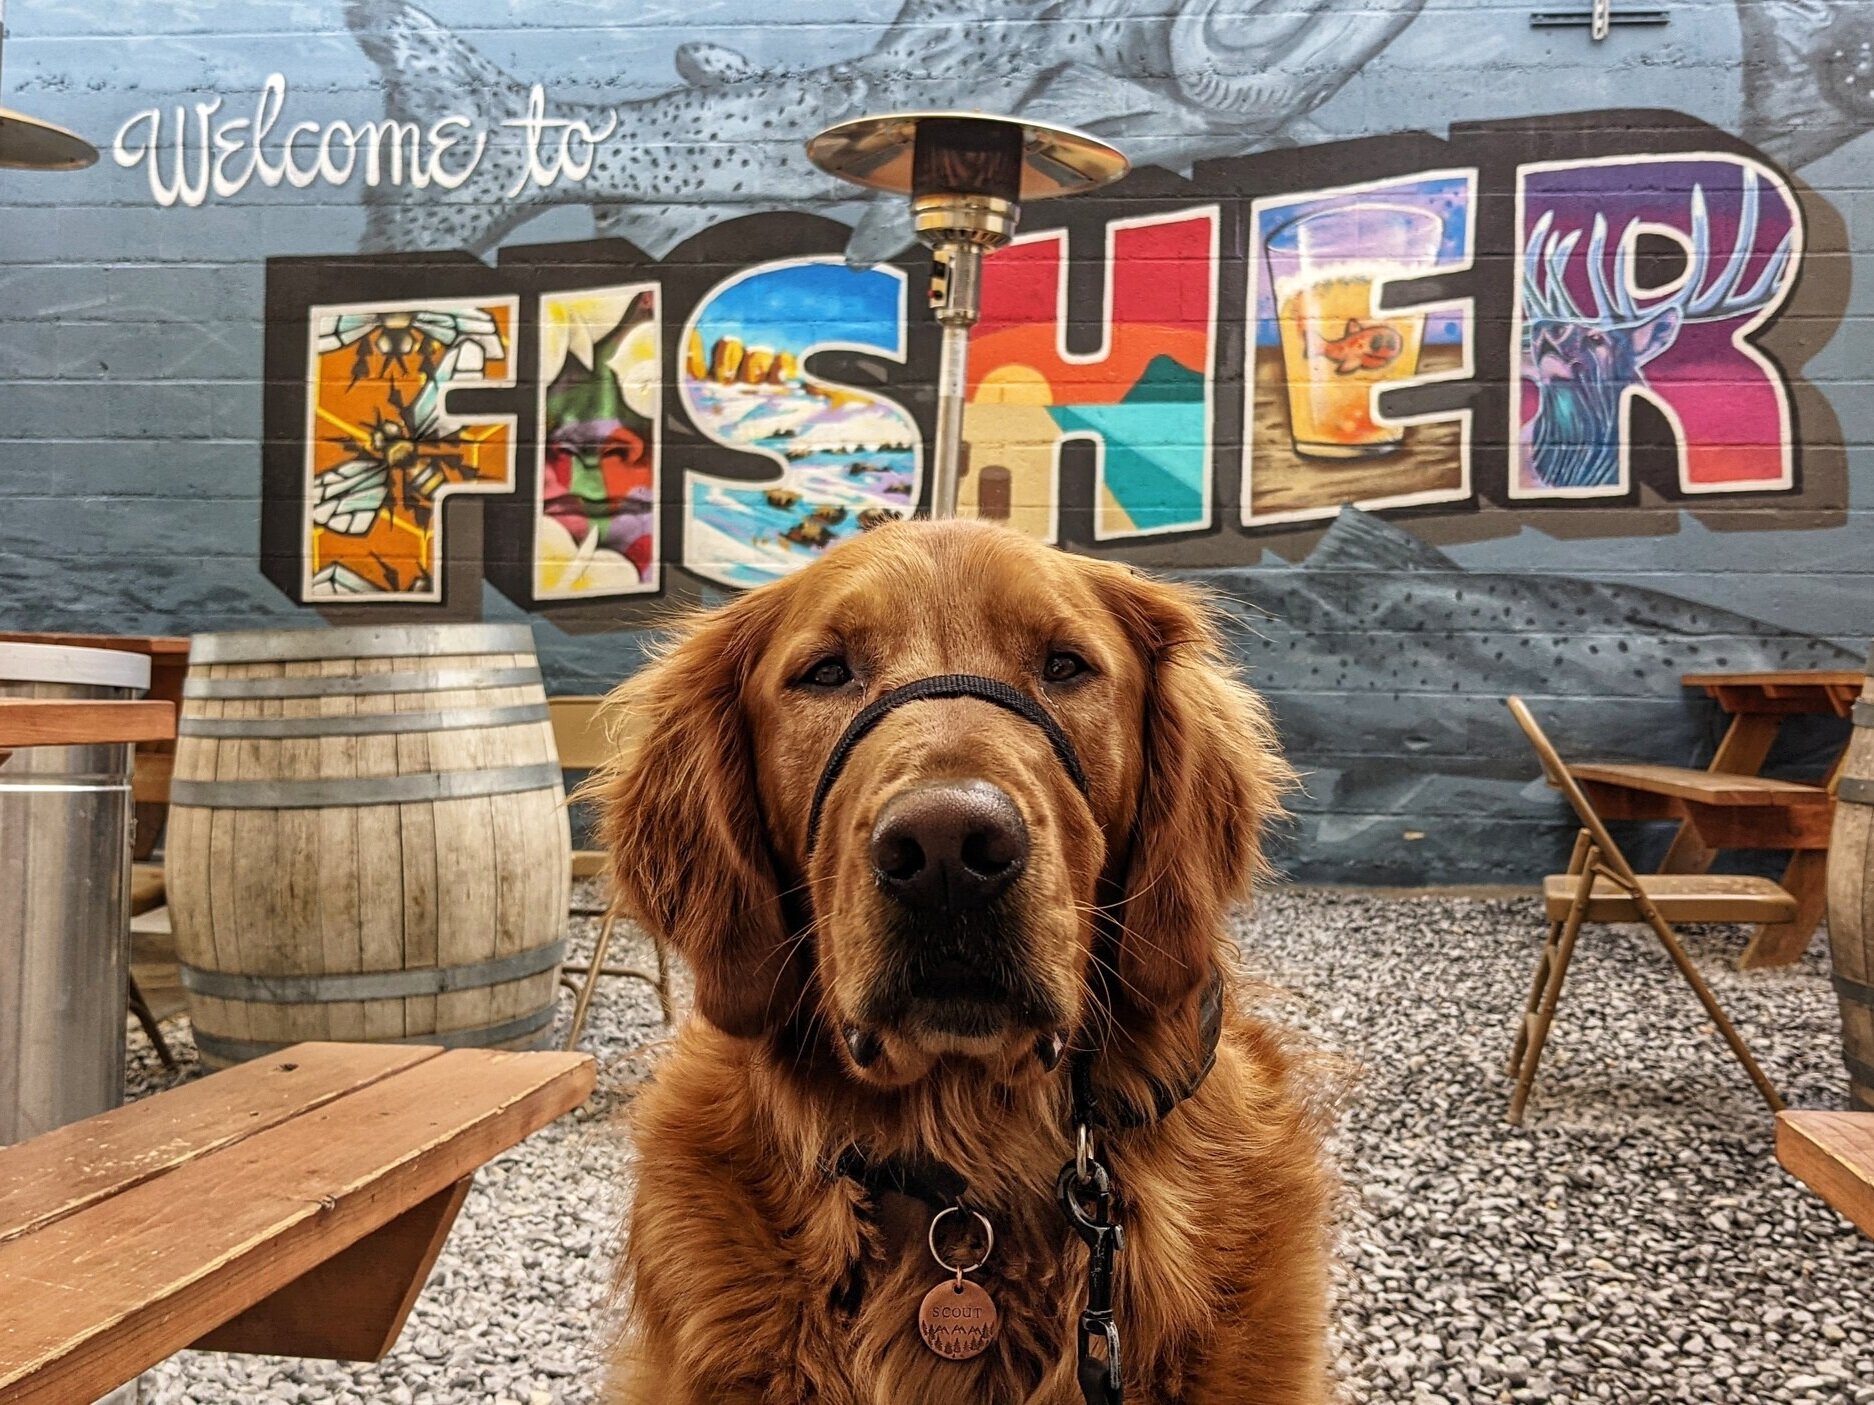 Scout sits on a gravel patio surrounded by picnic tables and wine barrels. There is a large colorful mural in the background noting “Welcome to Fisher.”